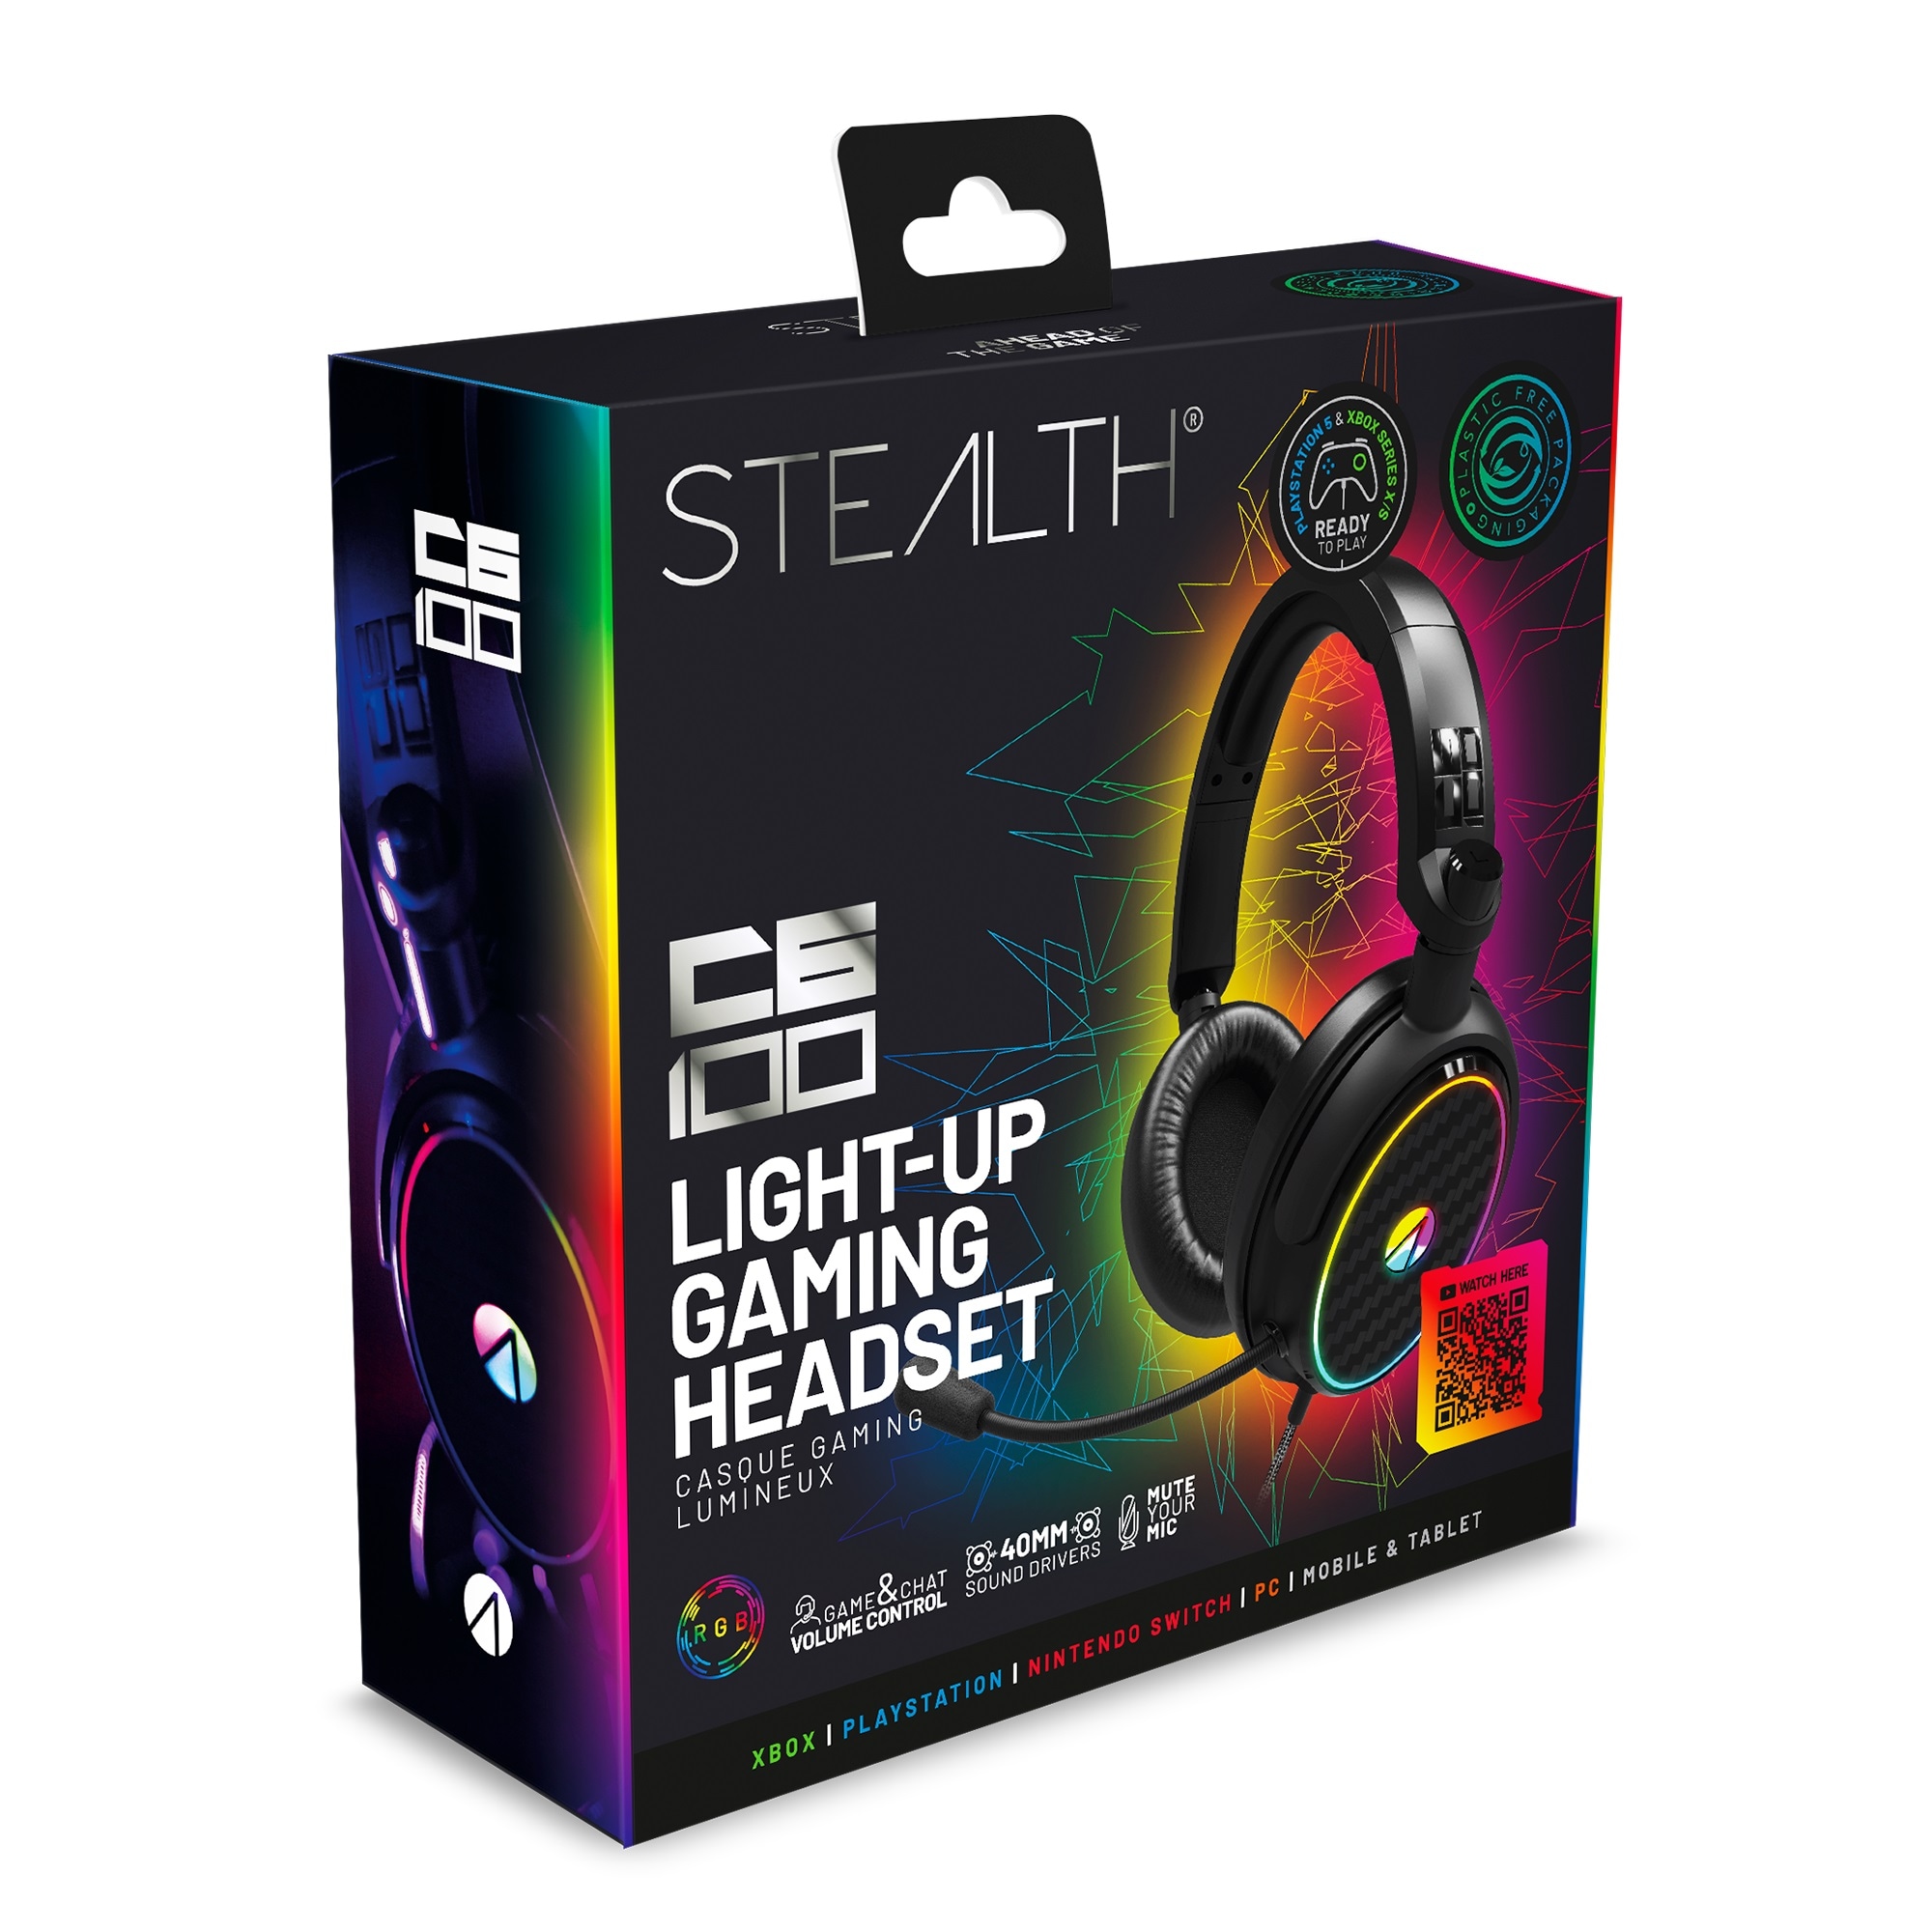 UNIVERSAL Verpackung Gaming-Headset | »Stereo Plastikfreie kaufen mit Stealth Headset Beleuchtung«, LED C6-100 Gaming online